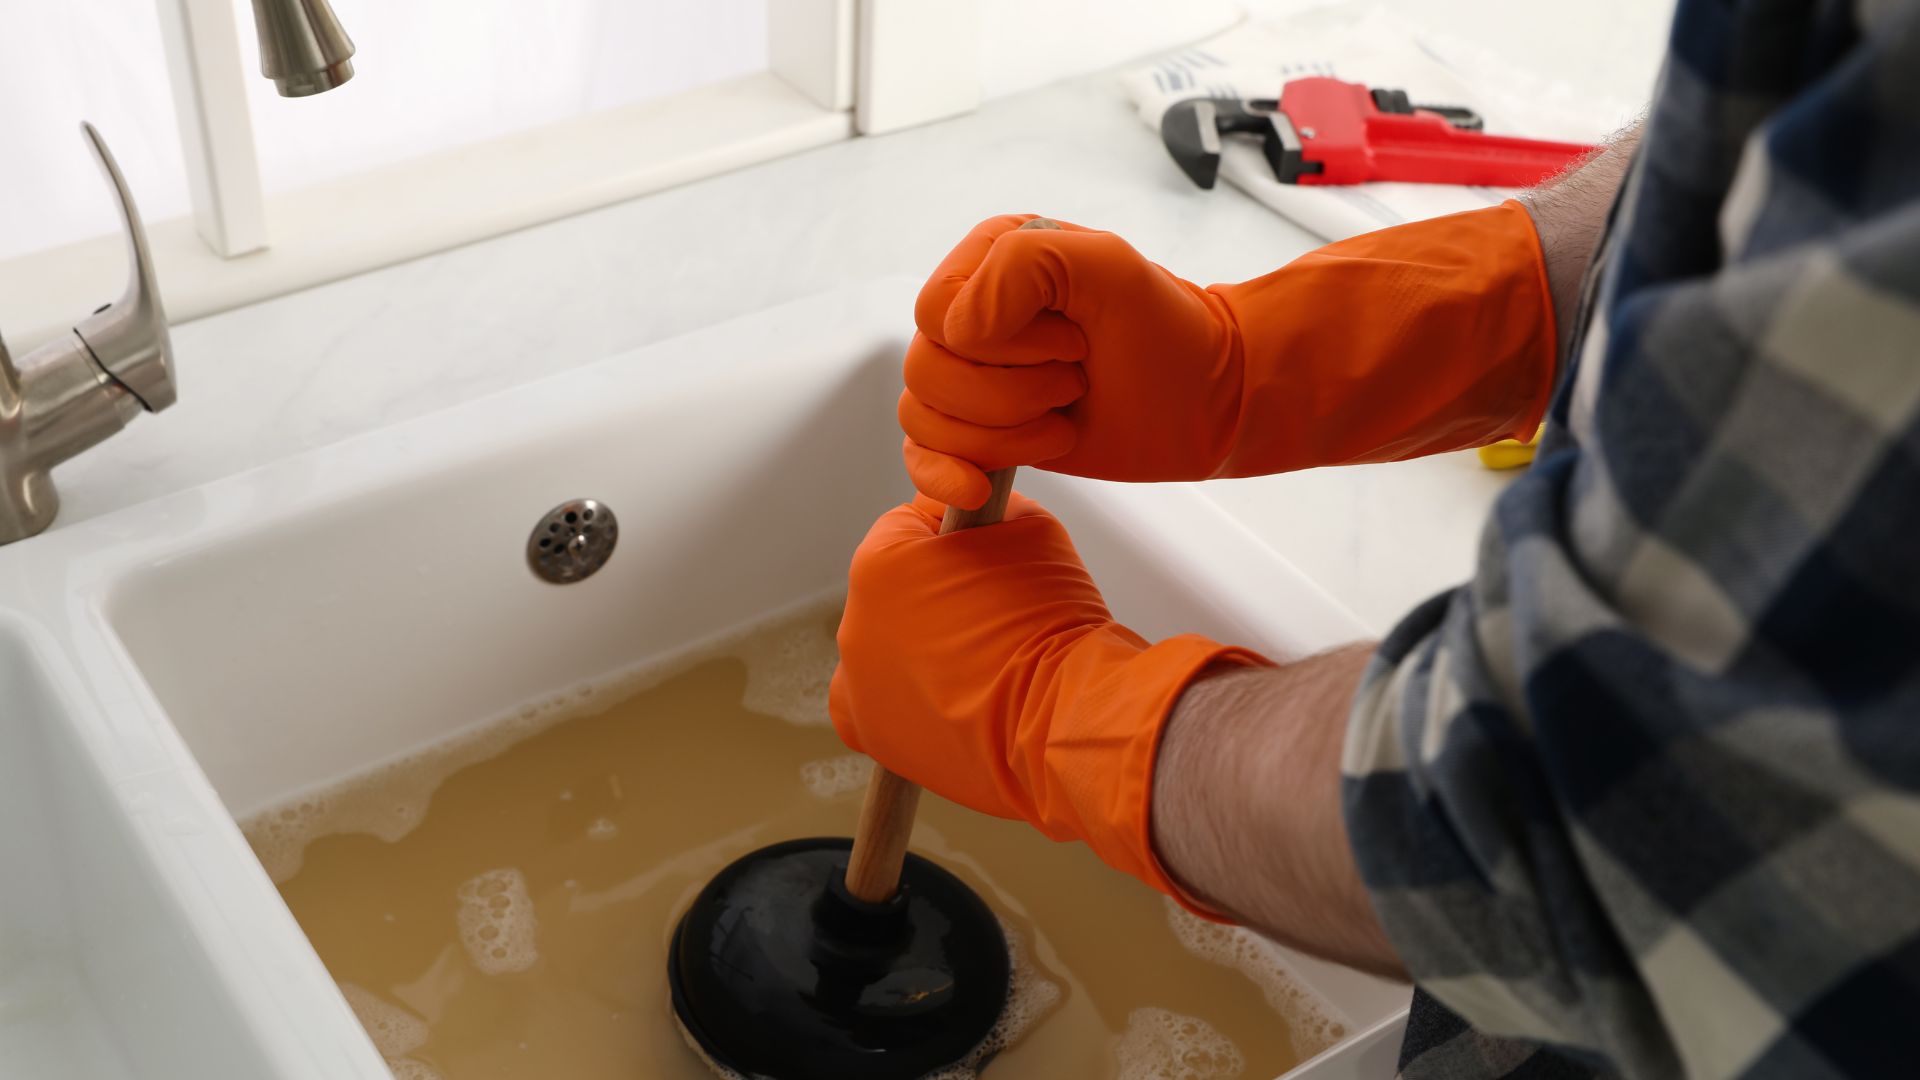 Plumbing issues such as sluggish drainage often necessitate the expertise of plumbers.